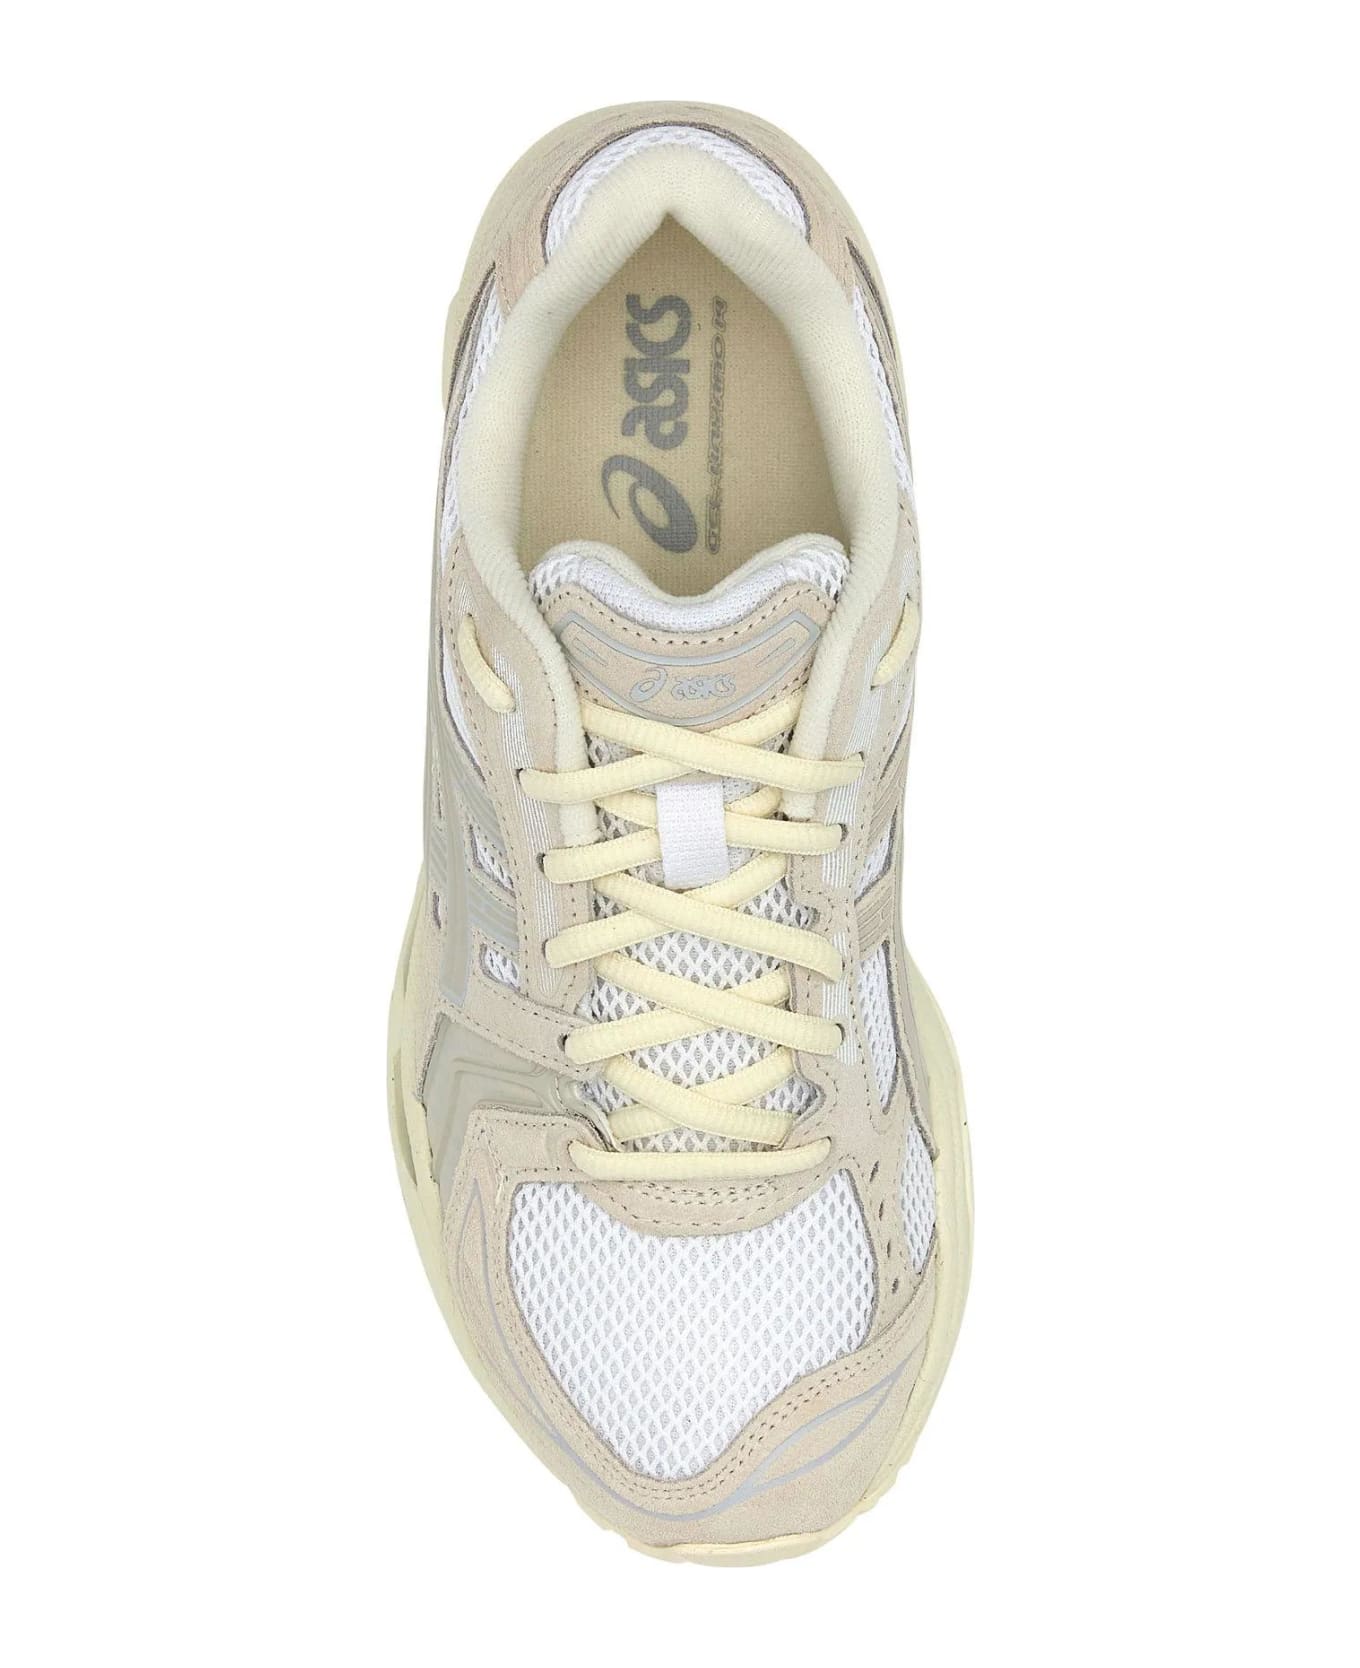 Asics Two-tone Mesh And Suede Gel-kayano 14 Sneakers - WHITE